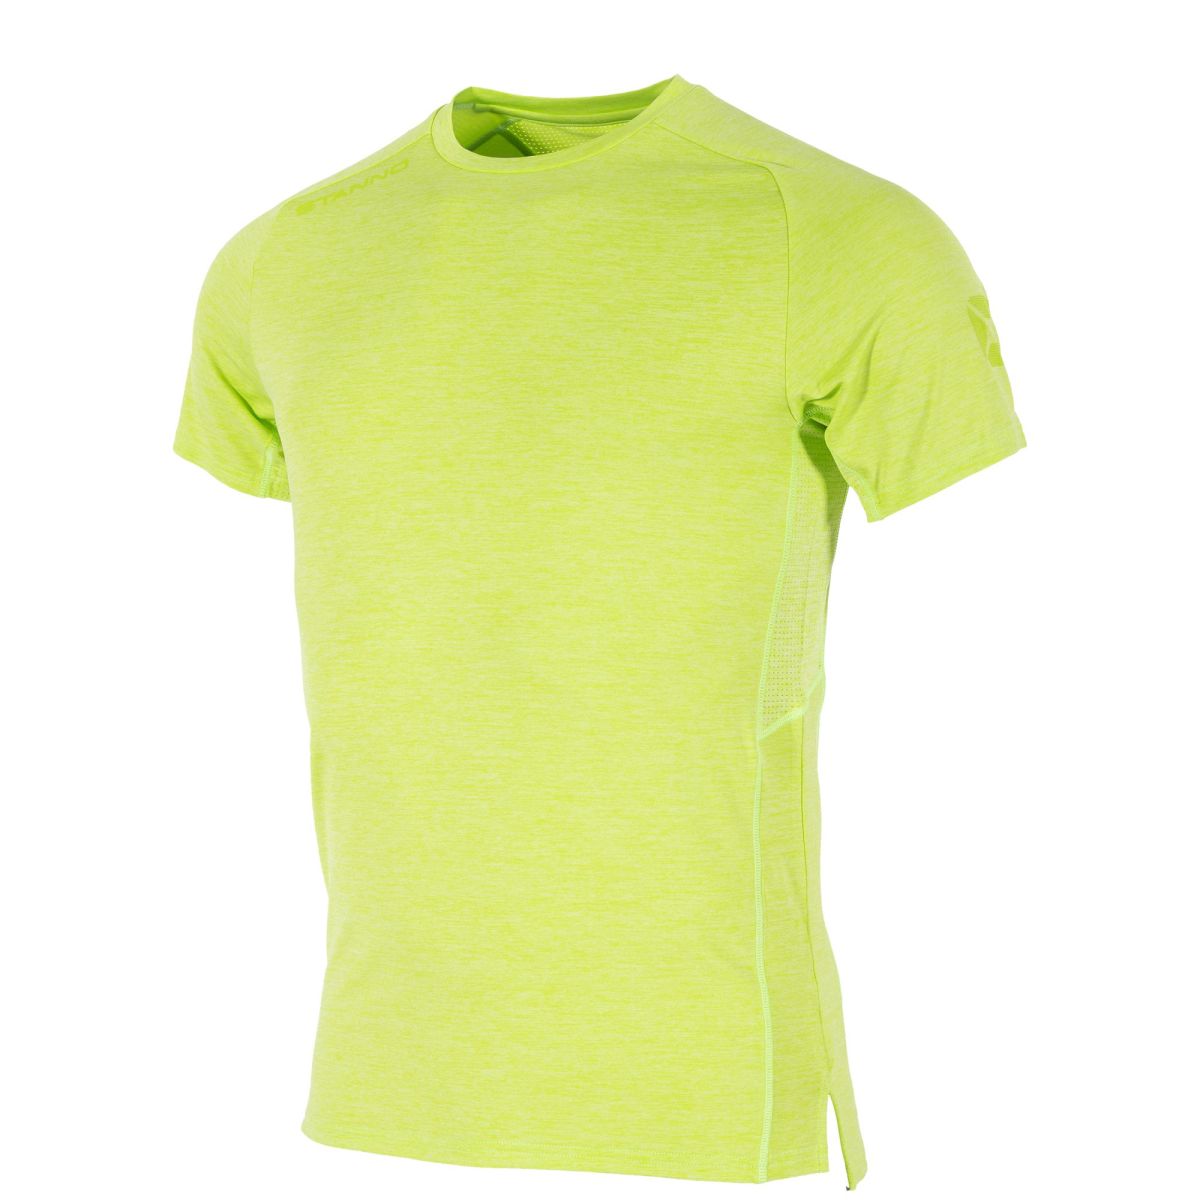 FUNCTIONALS TRAINING TEE Lime